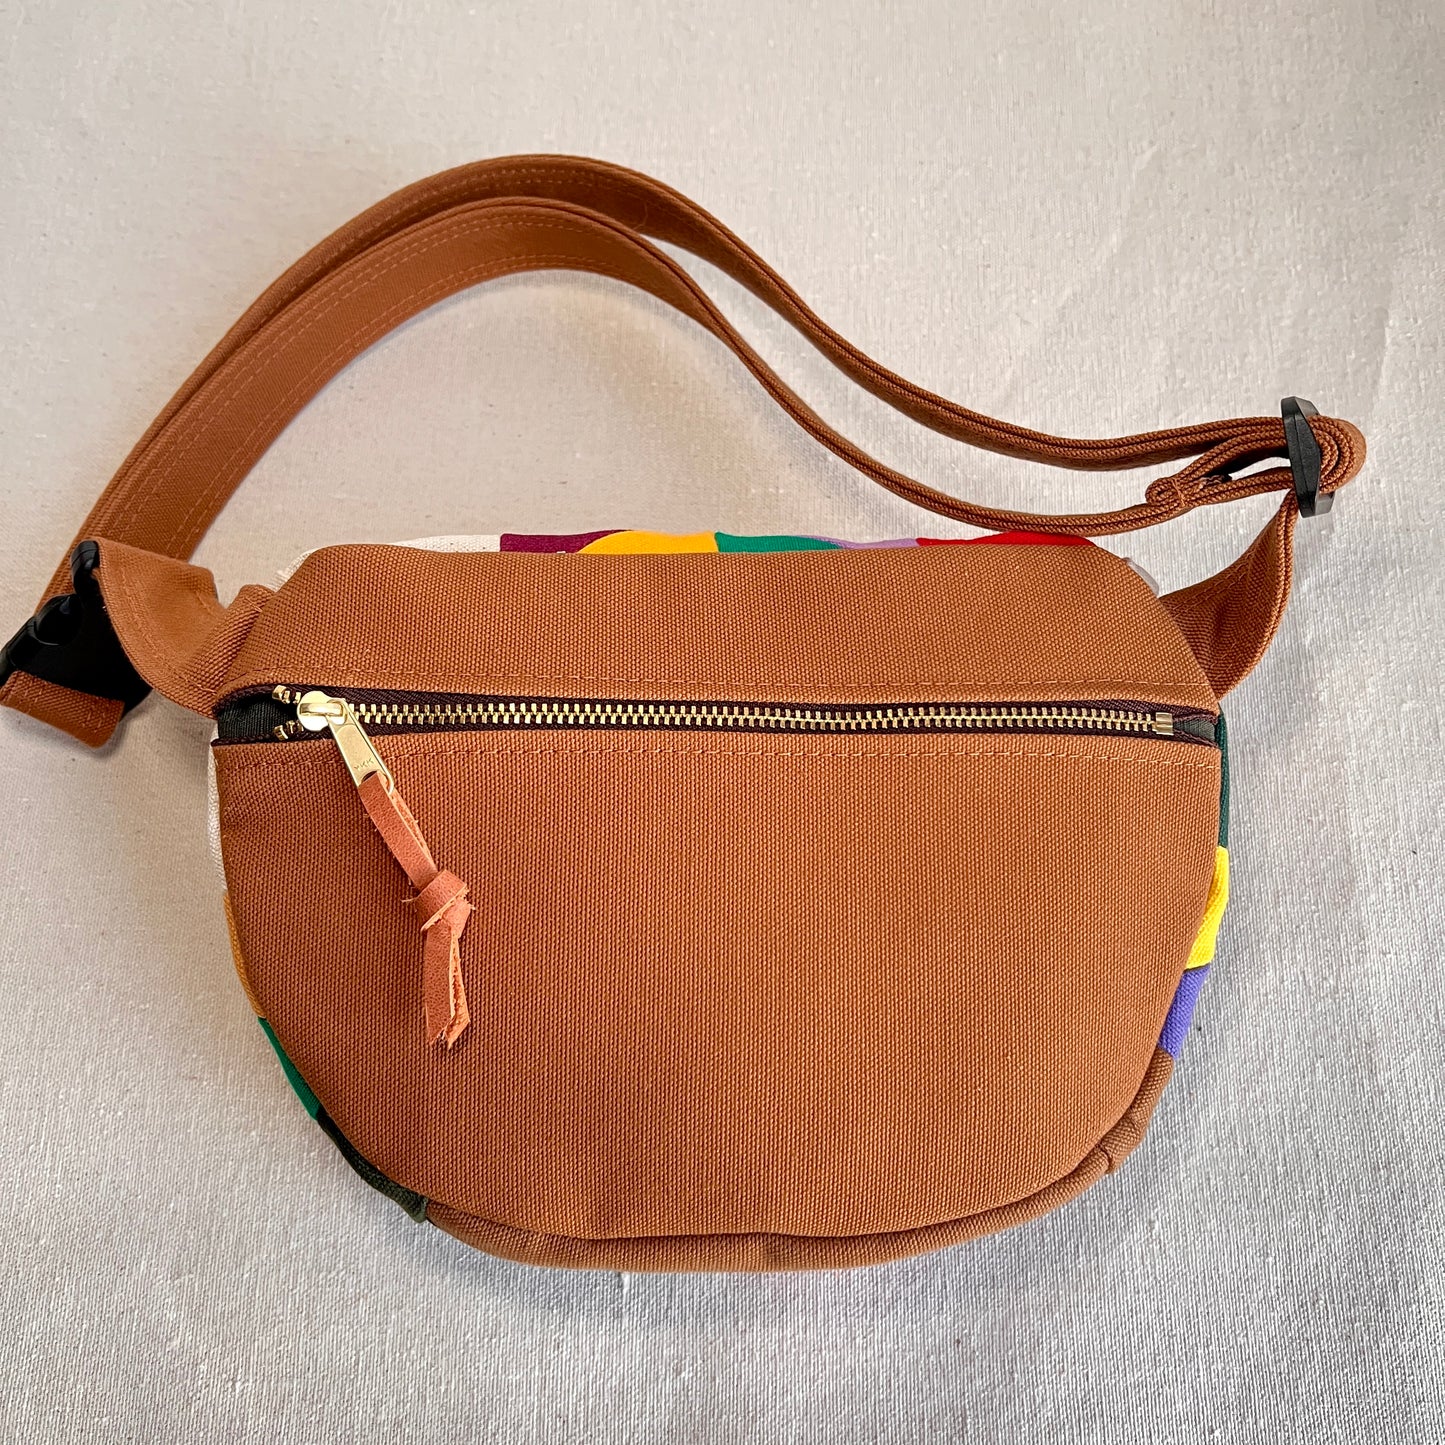 kaleidoscope fanny bag, jewel tones with brights + natural